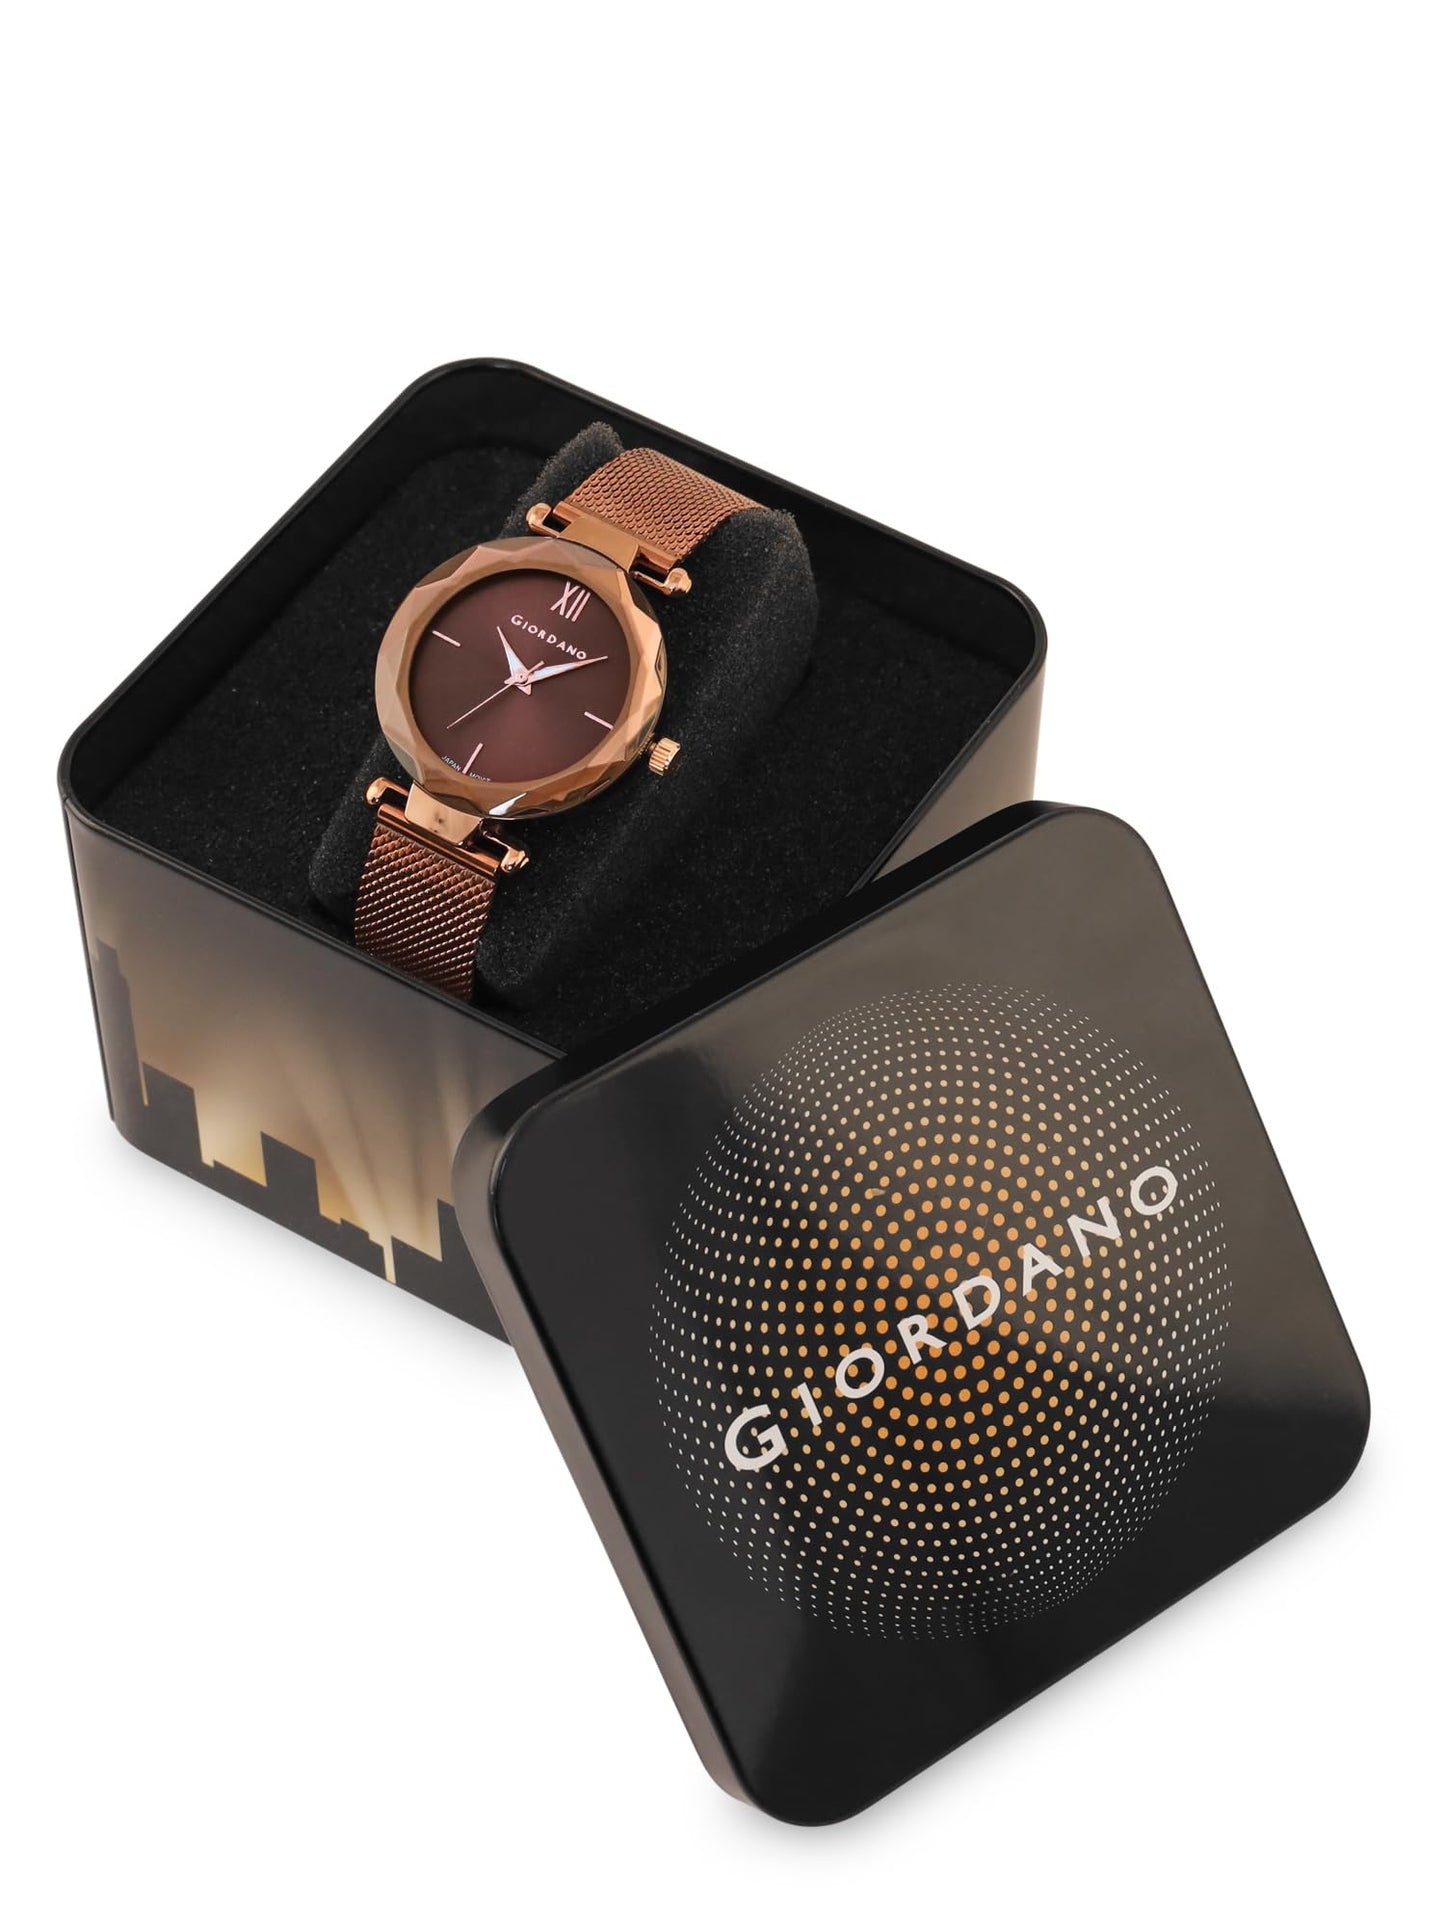 Giordano AW22 Collection Analog Watch for Women Stylish Metal Strap| 3 Hands Mechanism GZ-60042 (Brown)